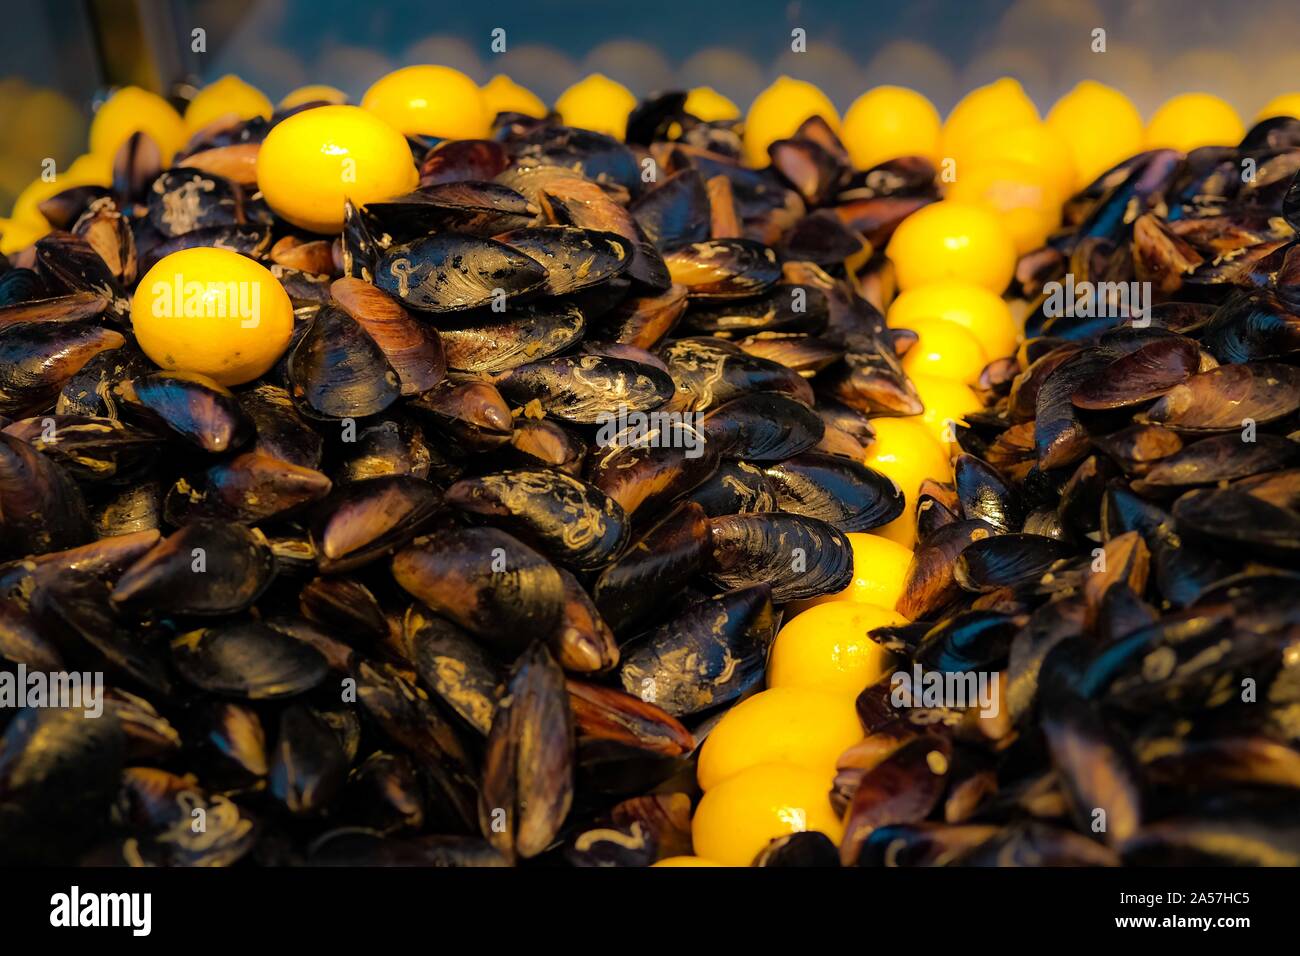 Ready to eat mussels stuffed with spicy cooked rice and lemon. Street fast food concept. Mediterranean region. Selective focuse. Stock Photo